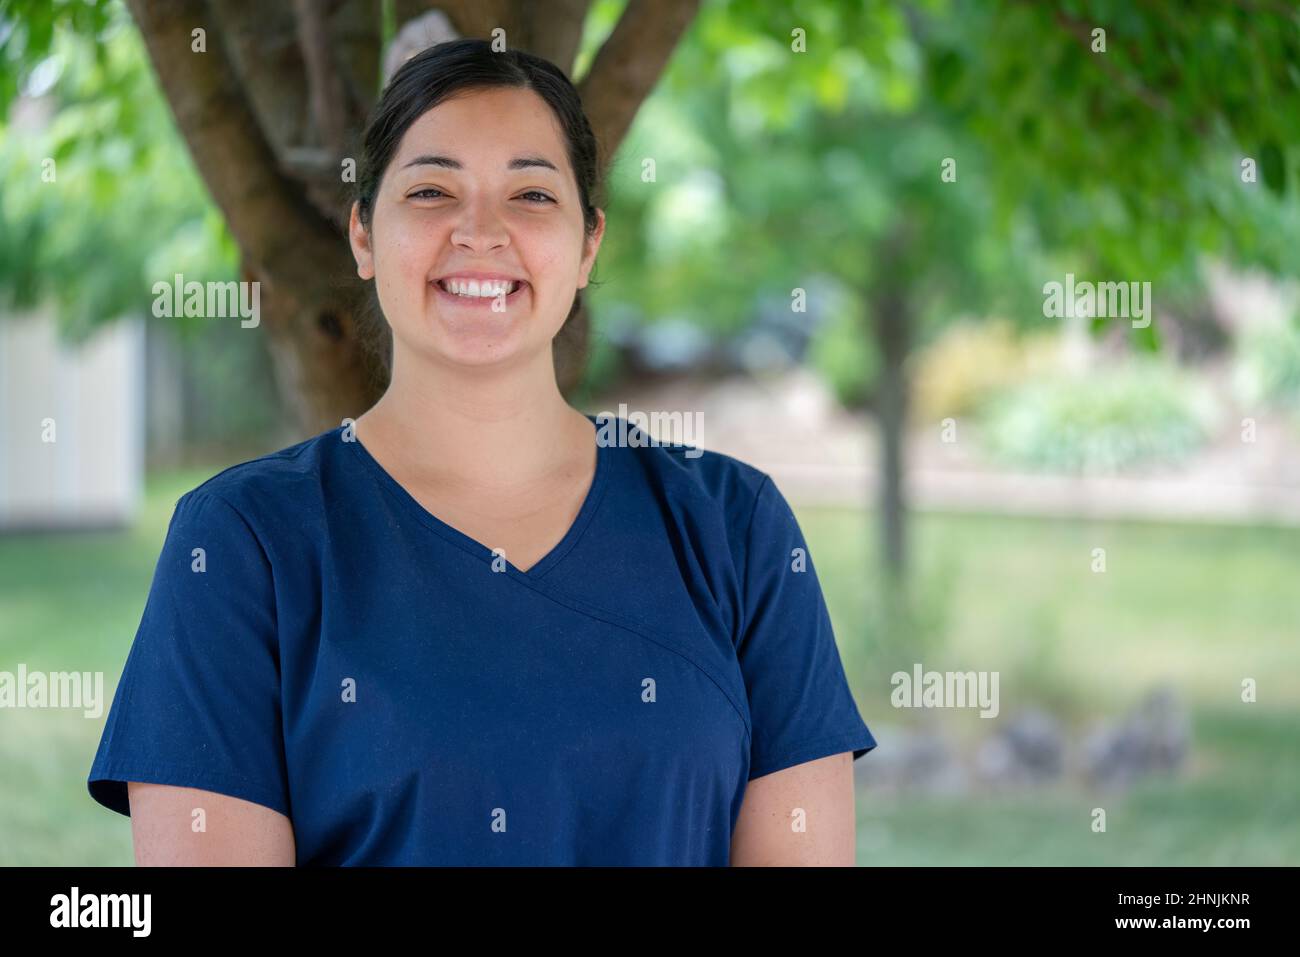 Beautiful, female, essential, front line home worker smiling. Long-term personal health care worker wearing navy blue medical scrubs in Canada. Stock Photo